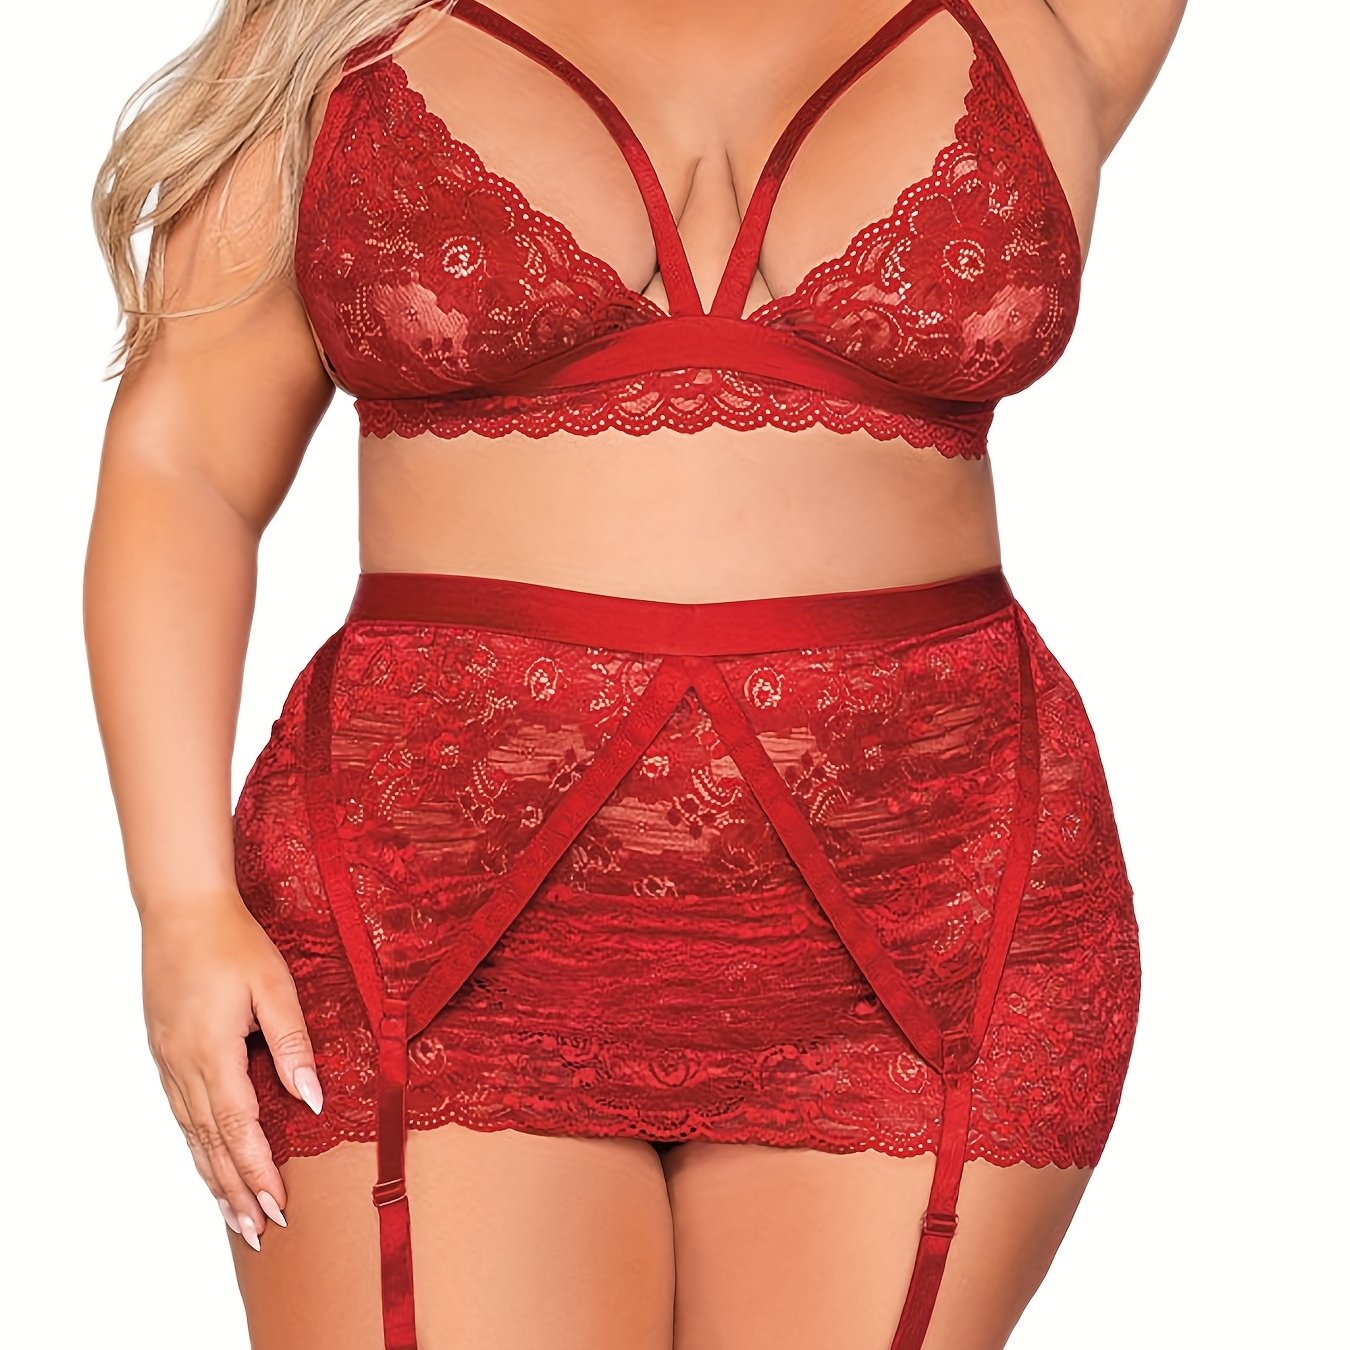 nsendm Female Underwear Adult Sexy Lingerie plus Size Role Play Women Sexy  Lace Floral Color Matching with Steel Valentines Lingerie for Women(Red,  XL) 